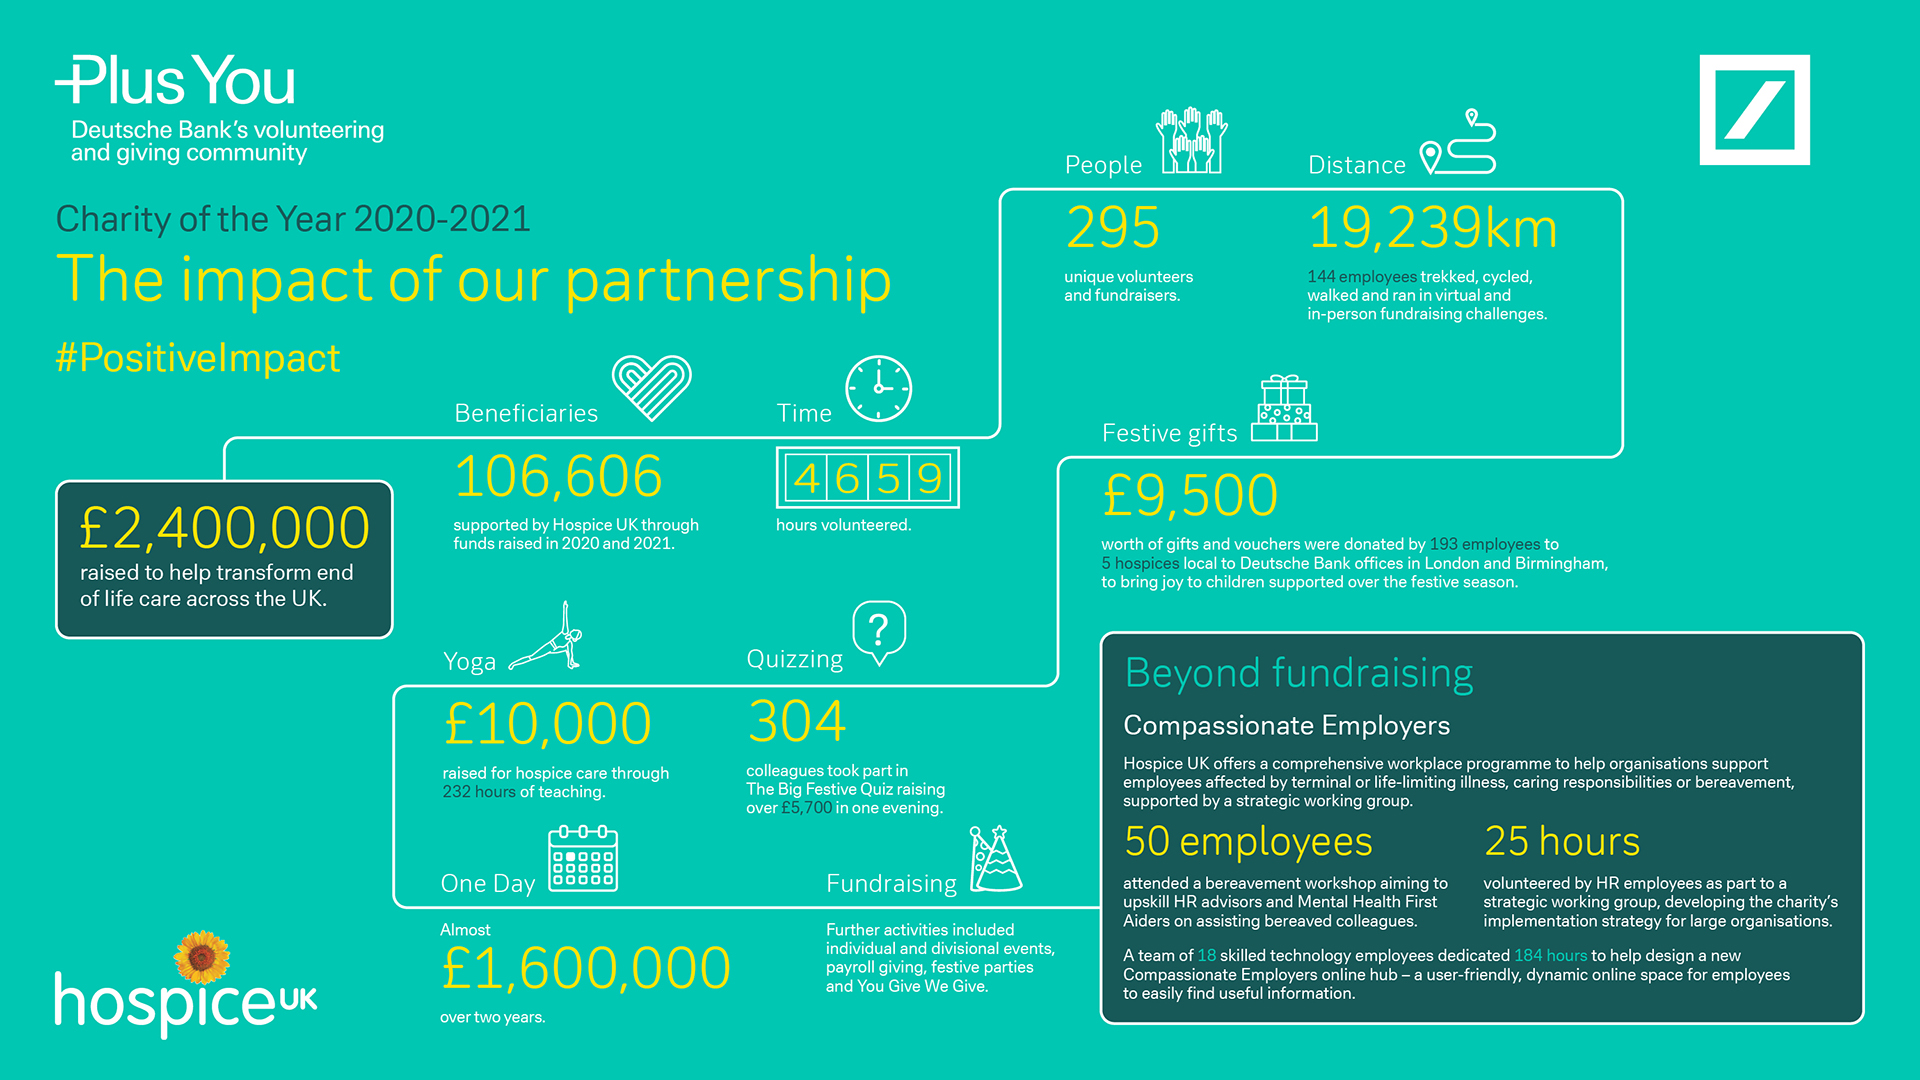 7206_2020-2021 COTY infographic - Hospice UK_16x9_Feb22_FIN2